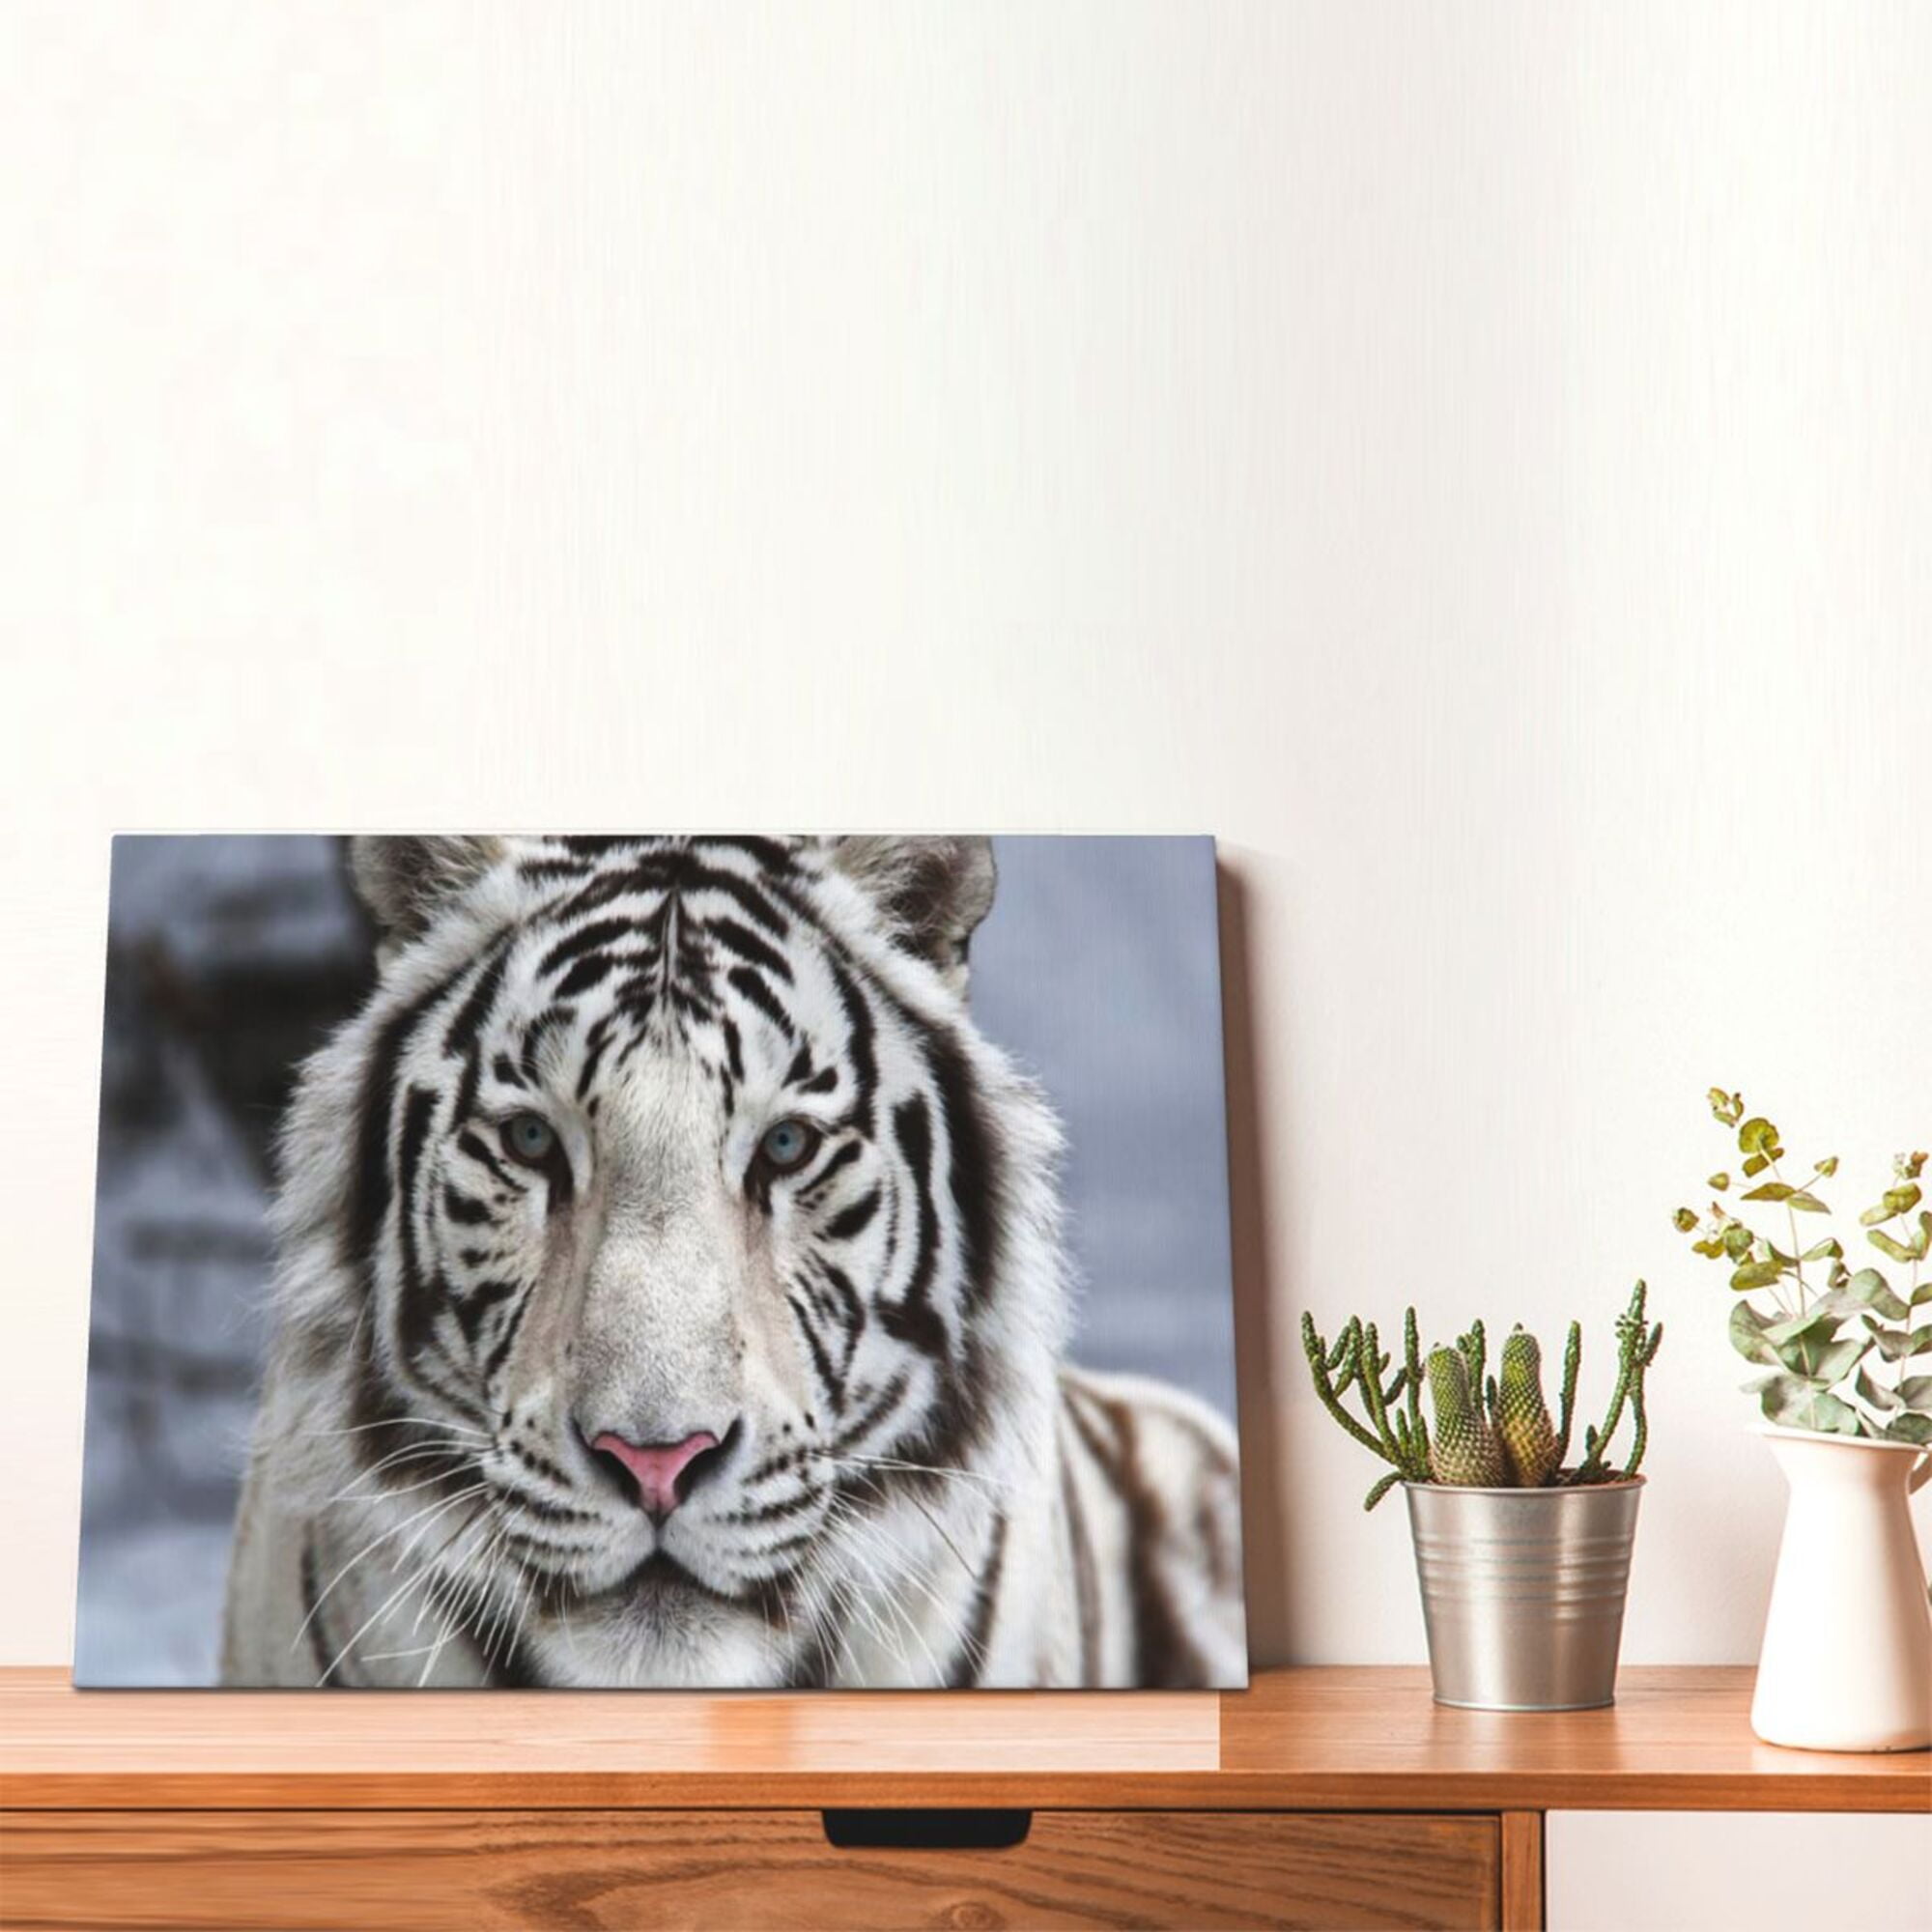 Decor White Painting Tiger 12x16in Decor Framed Artwork Wall Modern Room For Decorations Living Canvas Bathroom Bathroom Bedroom